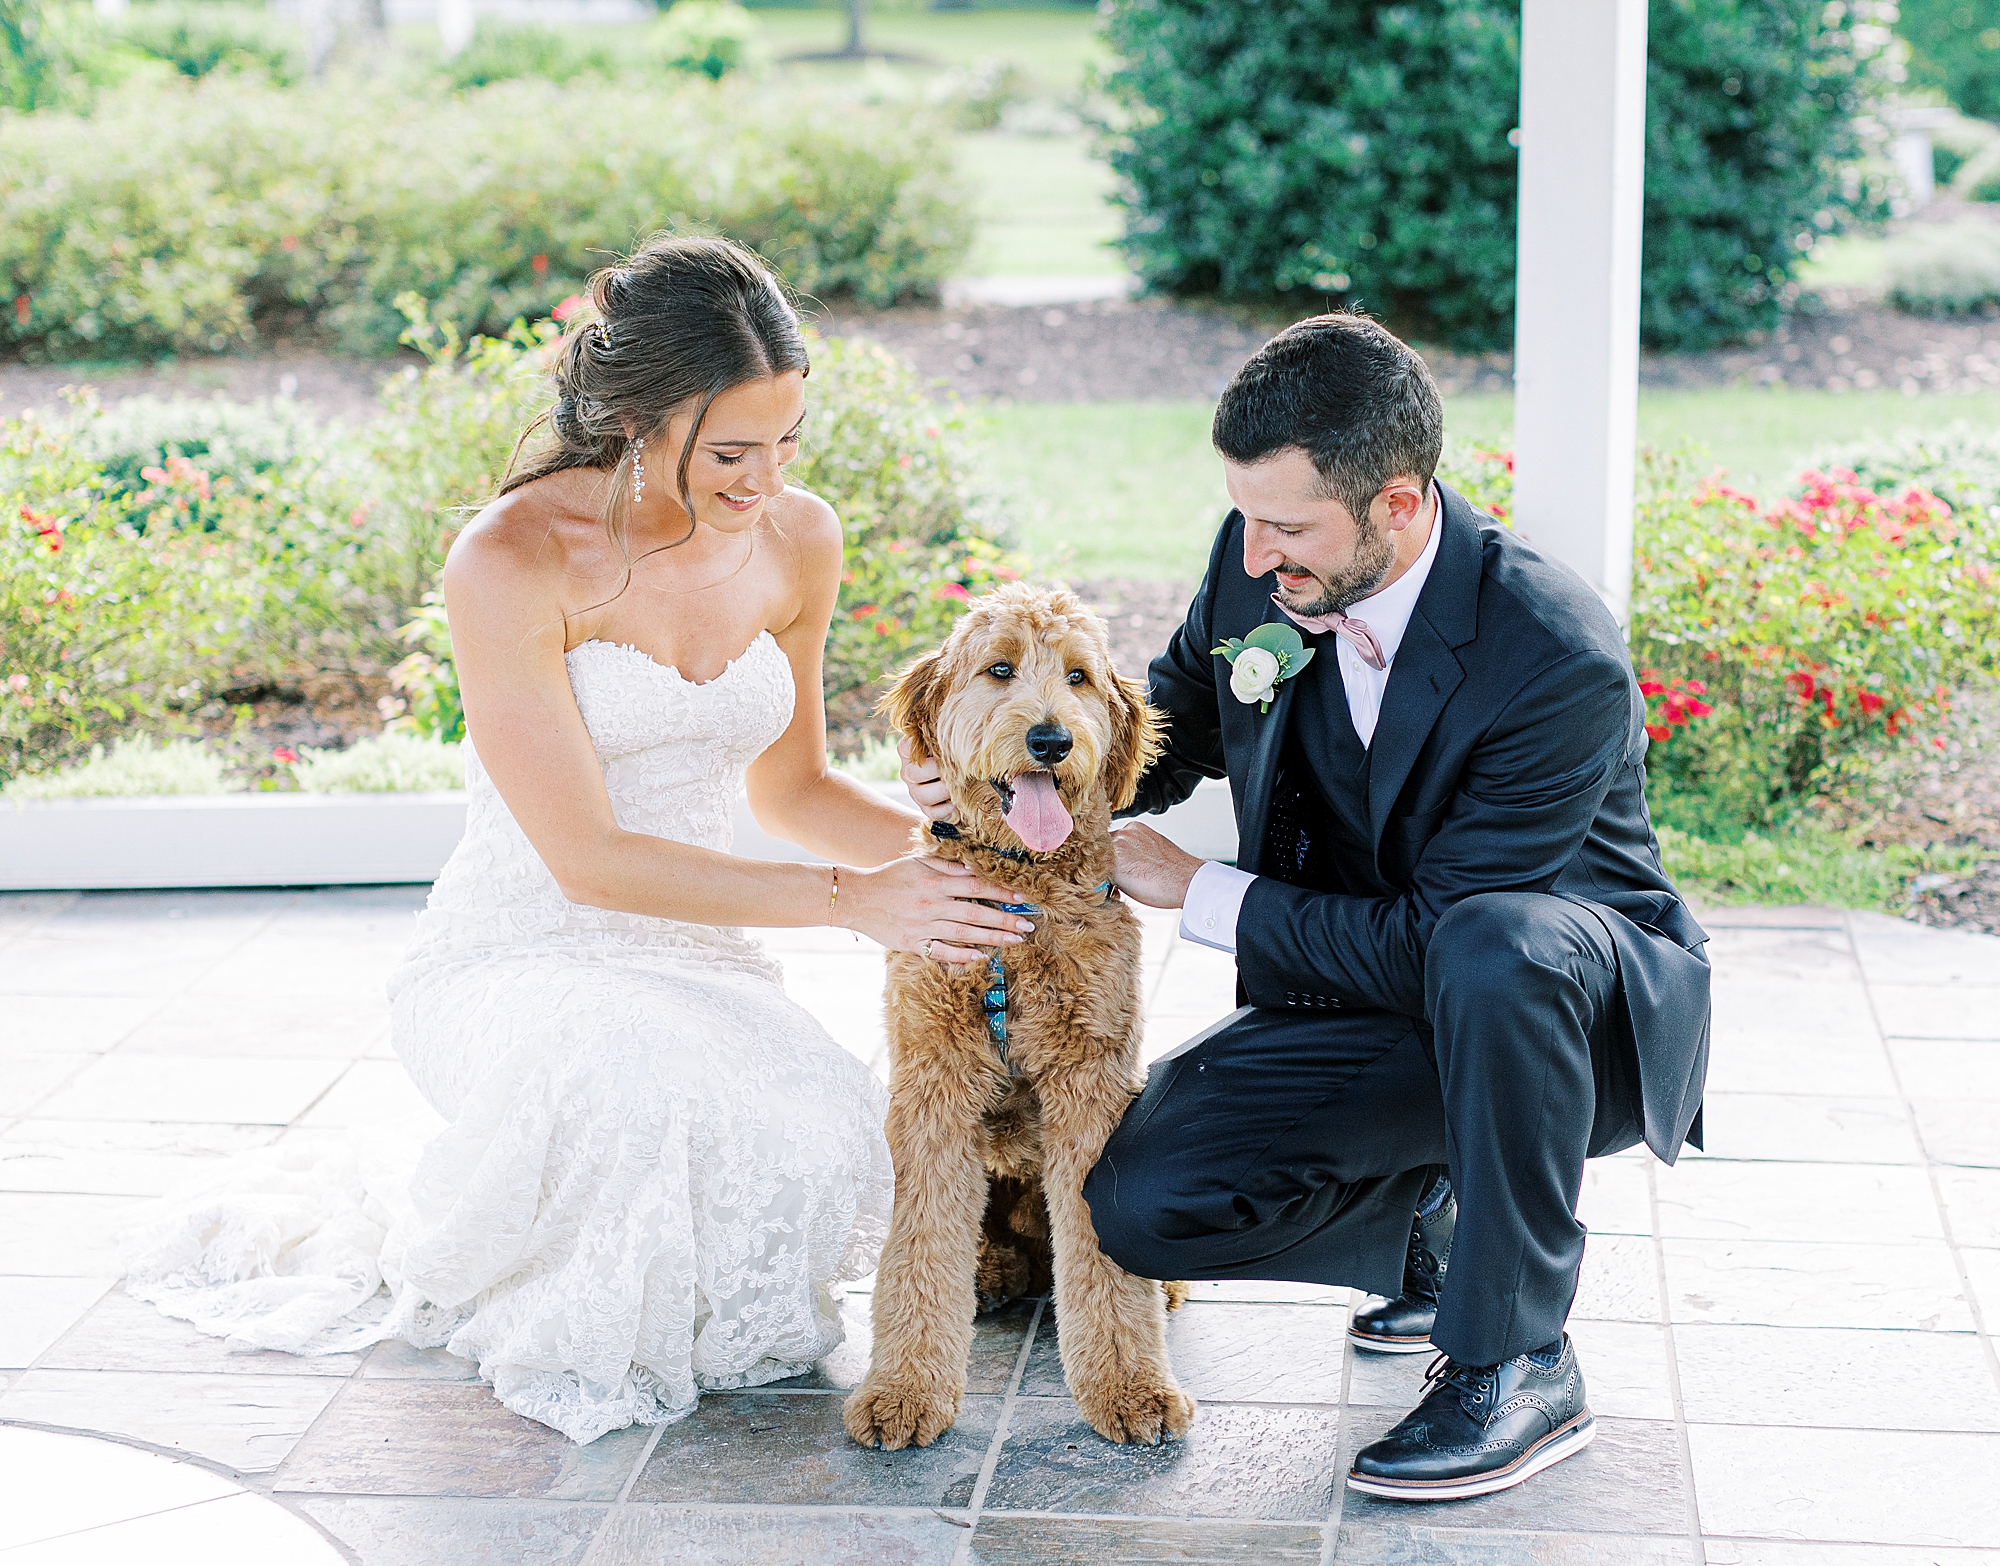 Puppy joins bride and groom for photos at wedding in Richmond.